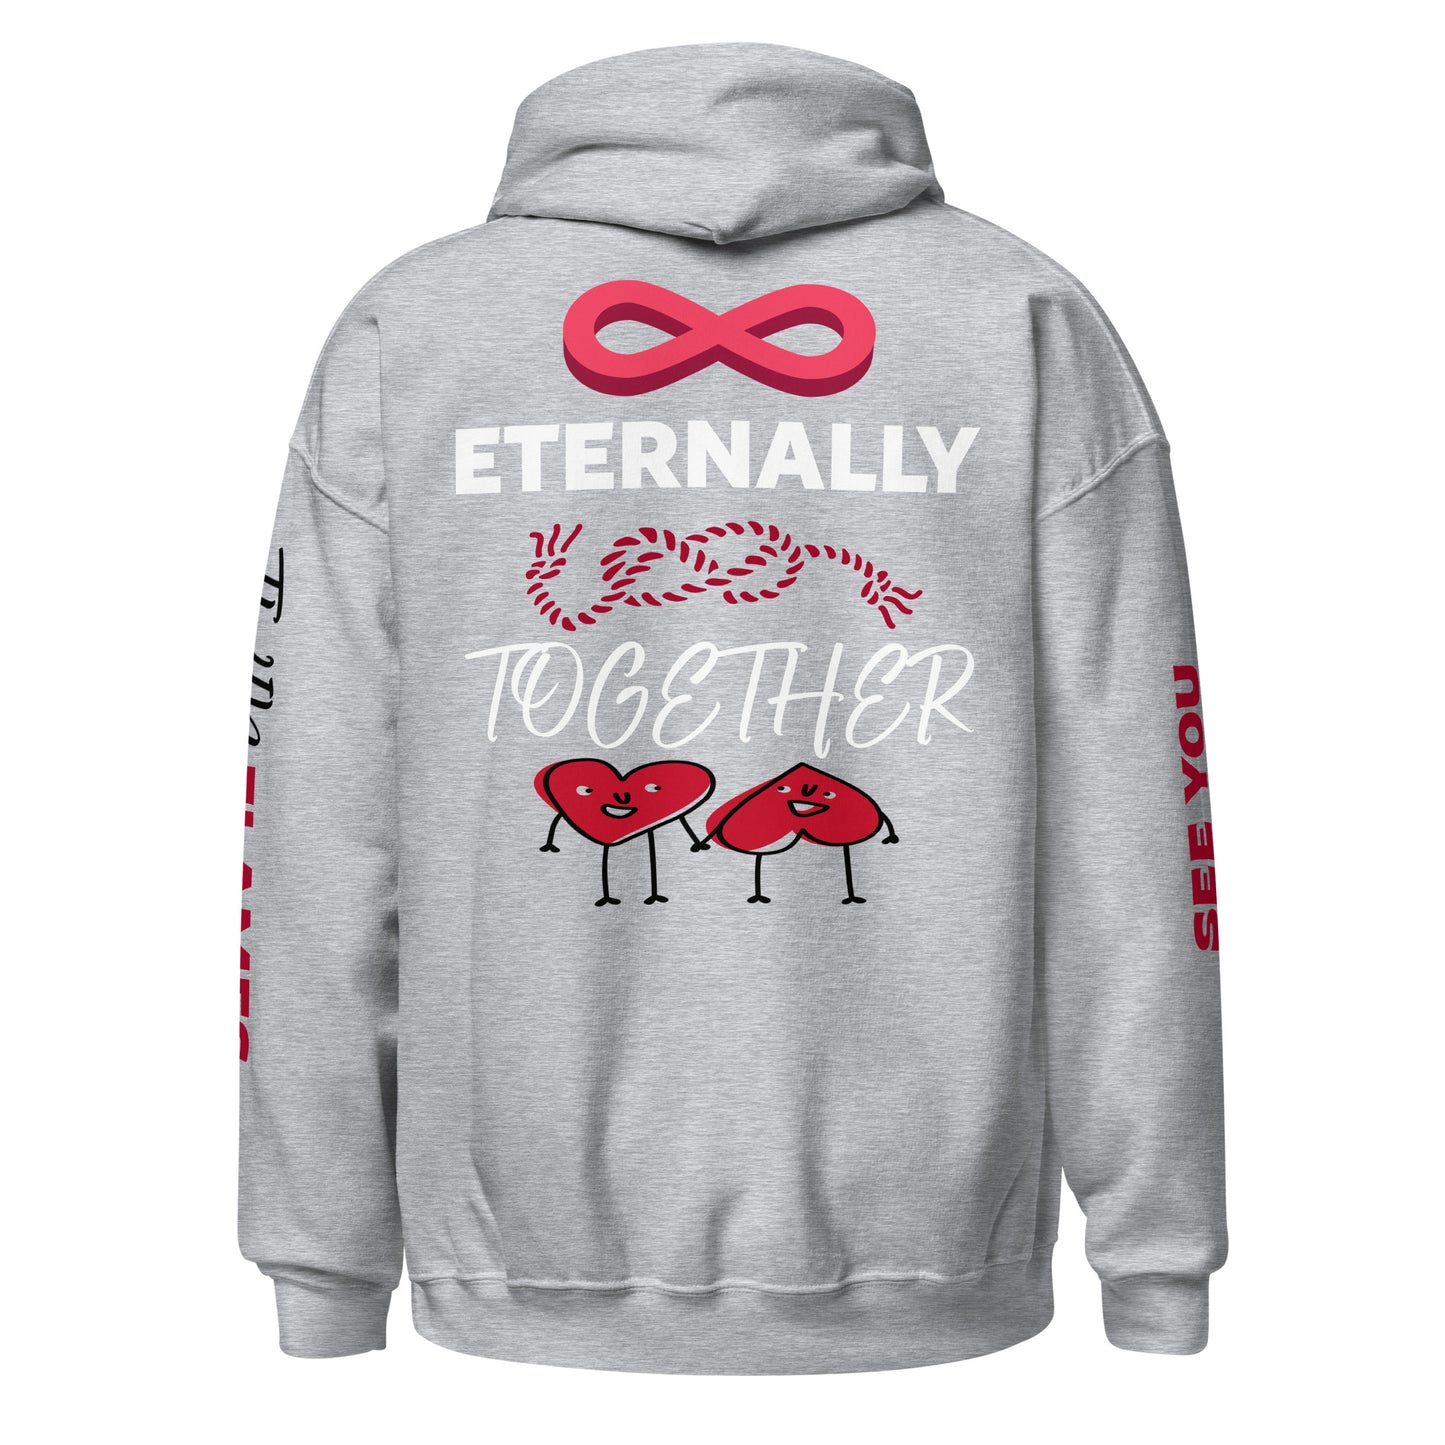 Unisex hoodies. Gender neutral clothing for all sexes. Gray graphic hoodies with designs on front, back, and sleeves. Gildan hoodies with messages on the back. Pink/red infinity symbol, the word "Eternally," a rope tied in an infinity knot, the word "TOGETHER," and two red hearts in love holding hands. A double-lined hood, matching drawstrings, front pouch pocket, and rib-knit cuffs. Made with 50% cotton/50% polyester. Sizes S-5X. JAMILLIAH'S WISDOM IS TIMELESS SHOP - wisdomistimeless.com.